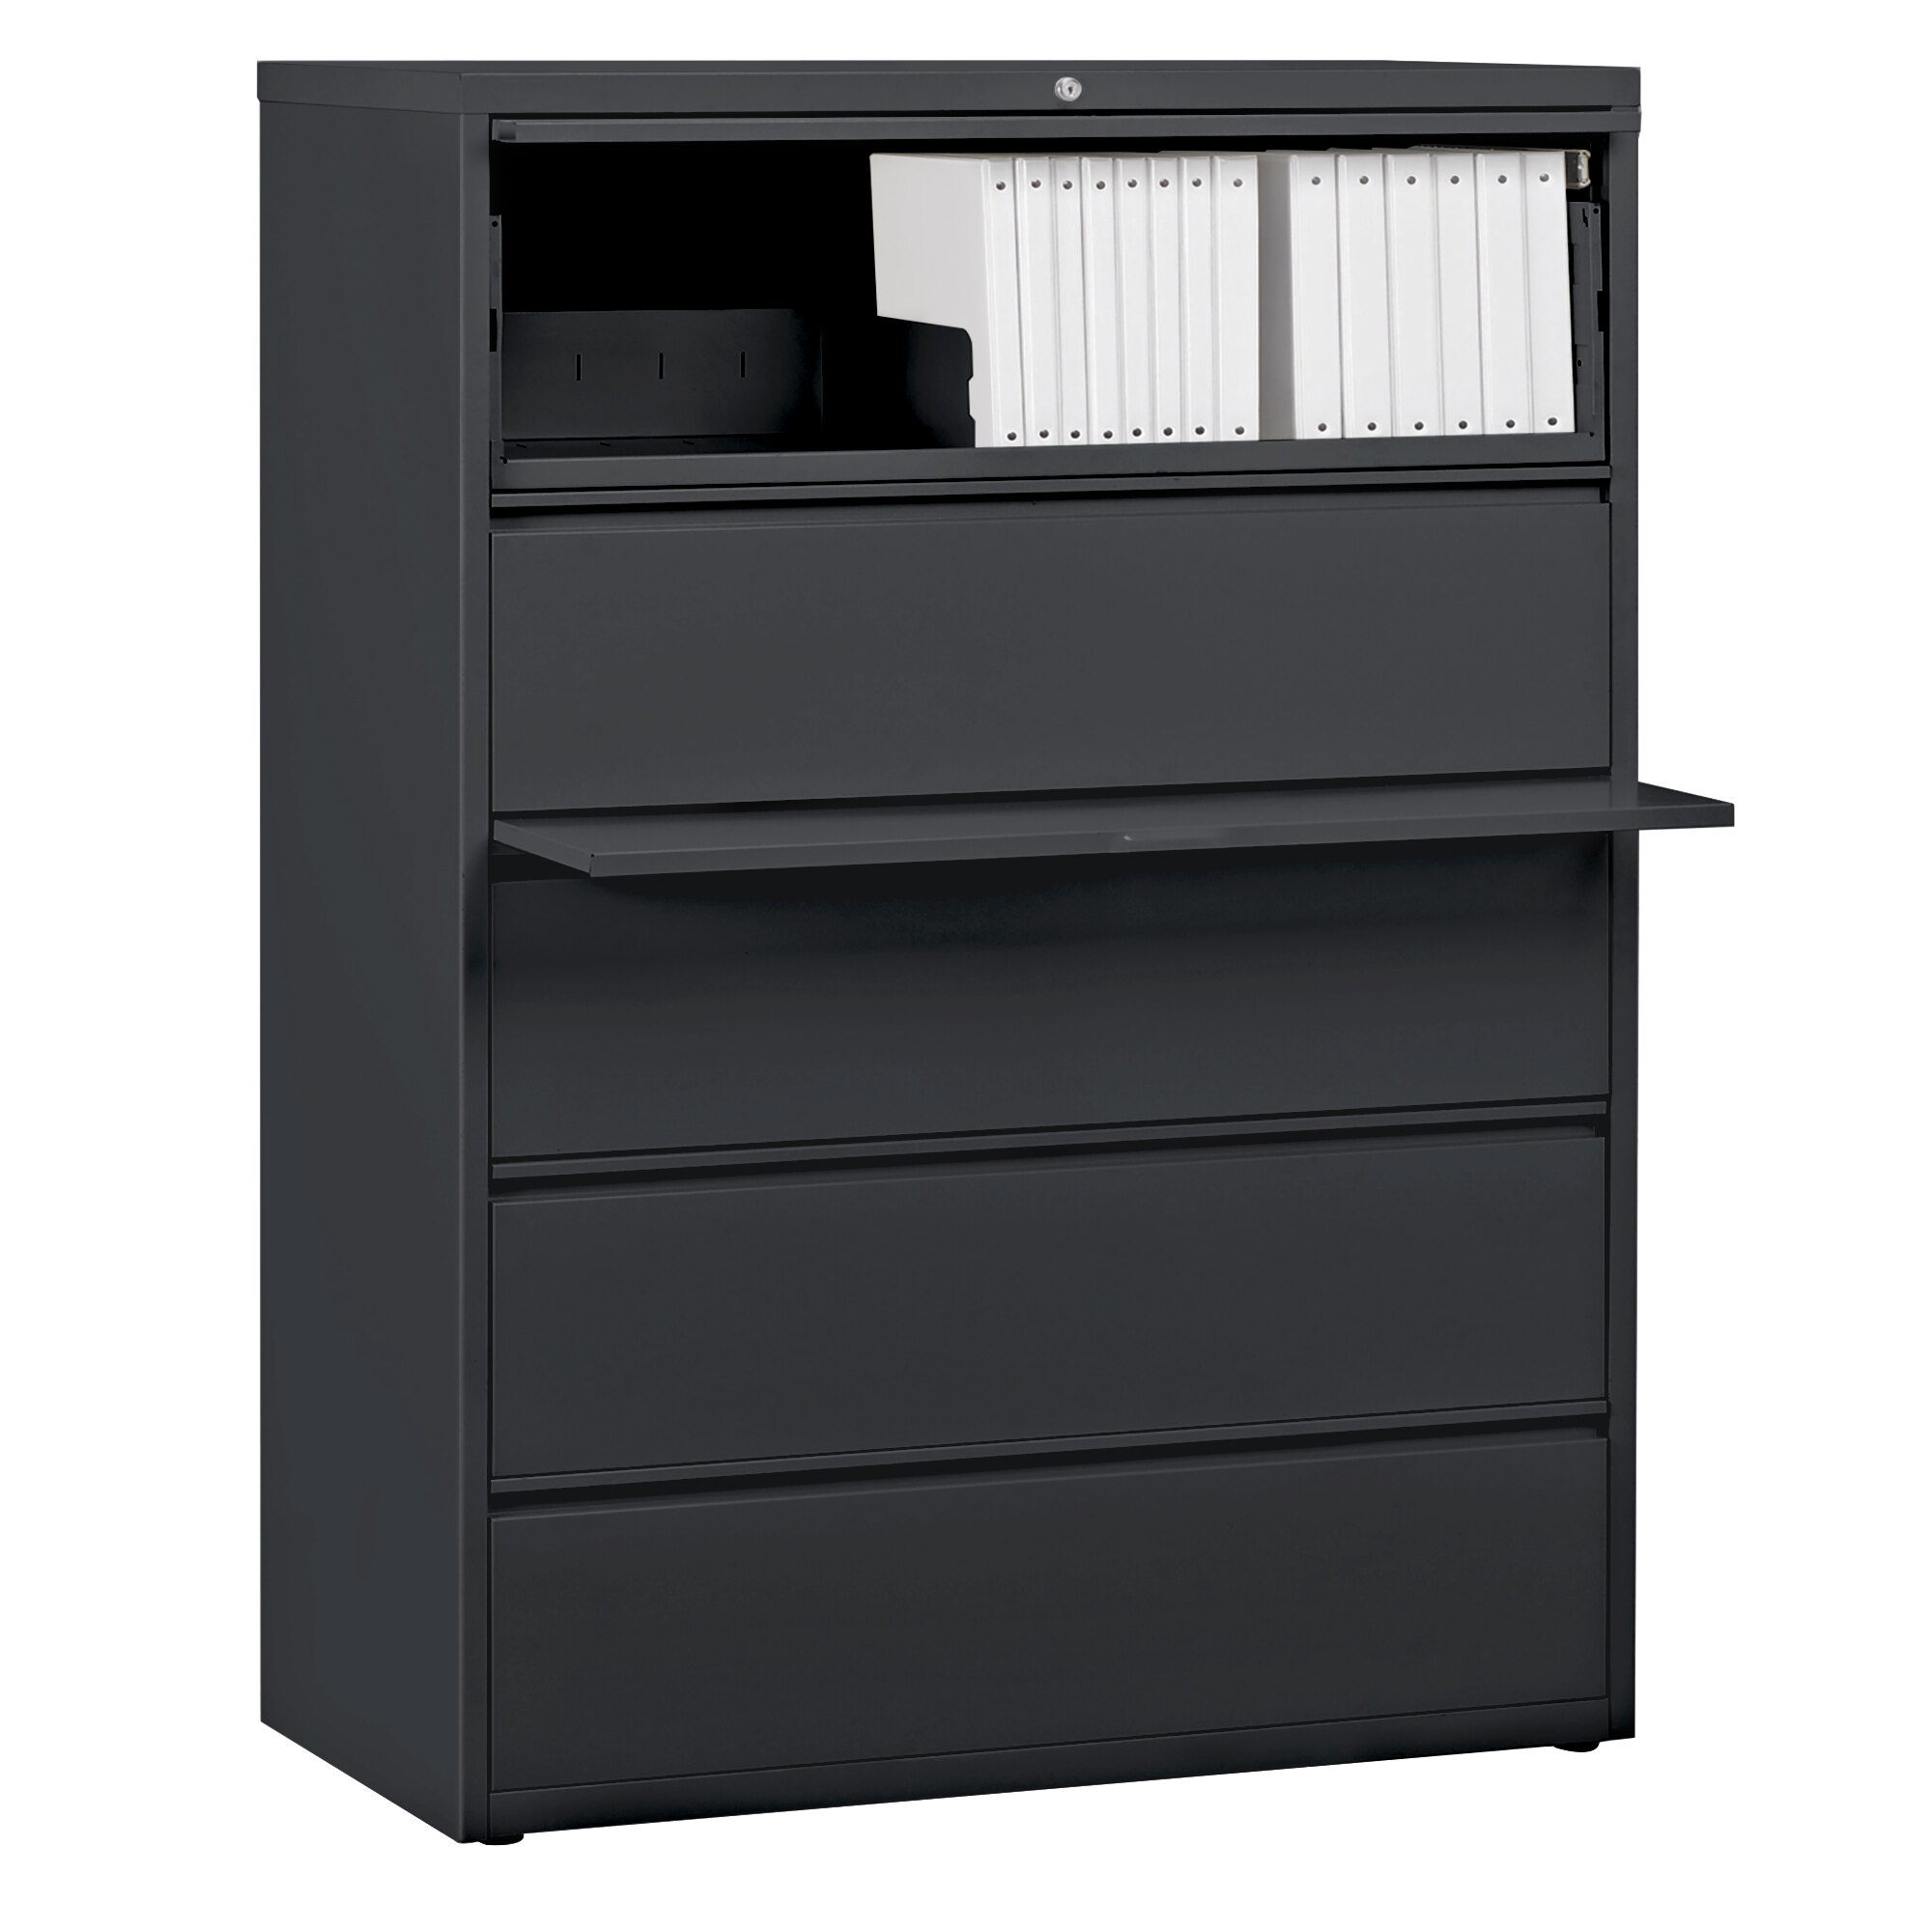 Hirsh Industries 17651 Charcoal FiveDrawer Lateral File